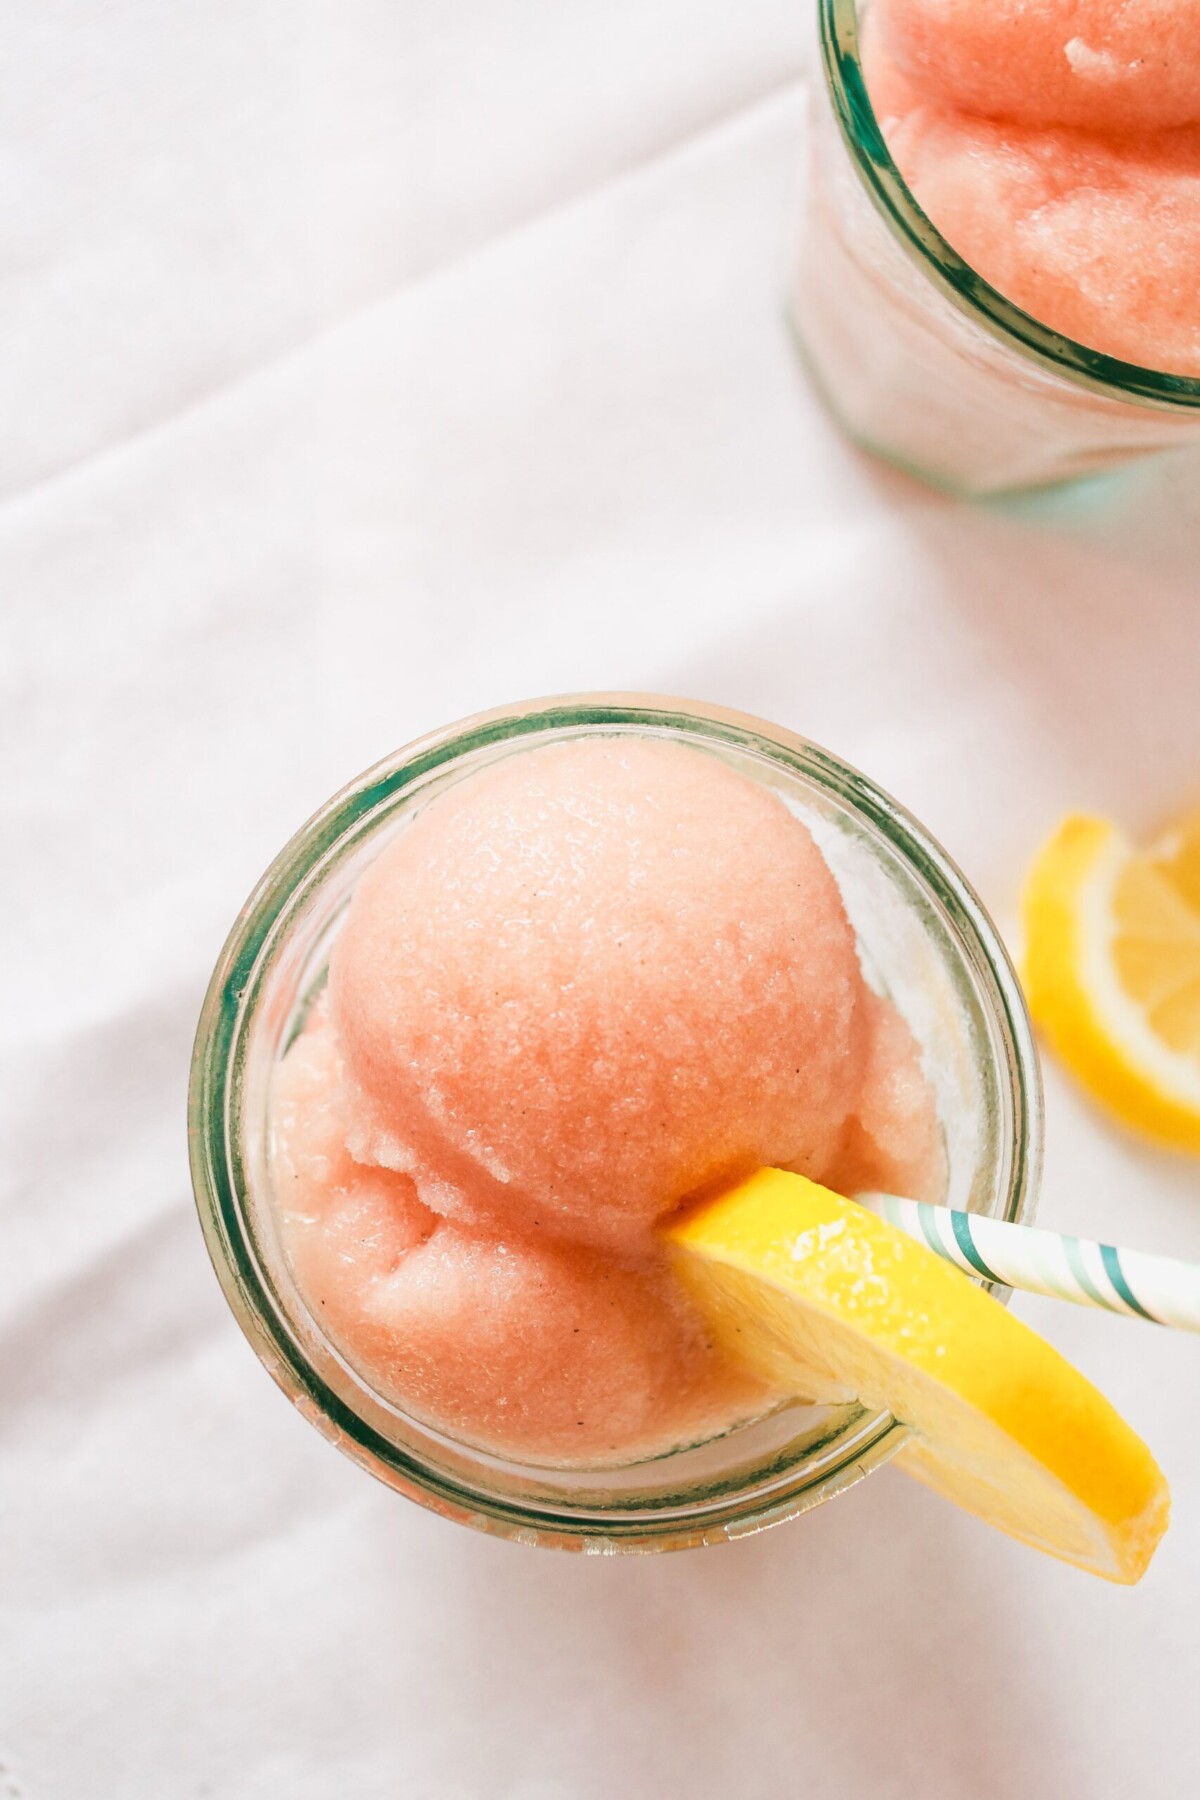 Scoops of rhubarb ice in glasses with lemon slices and spoons. 